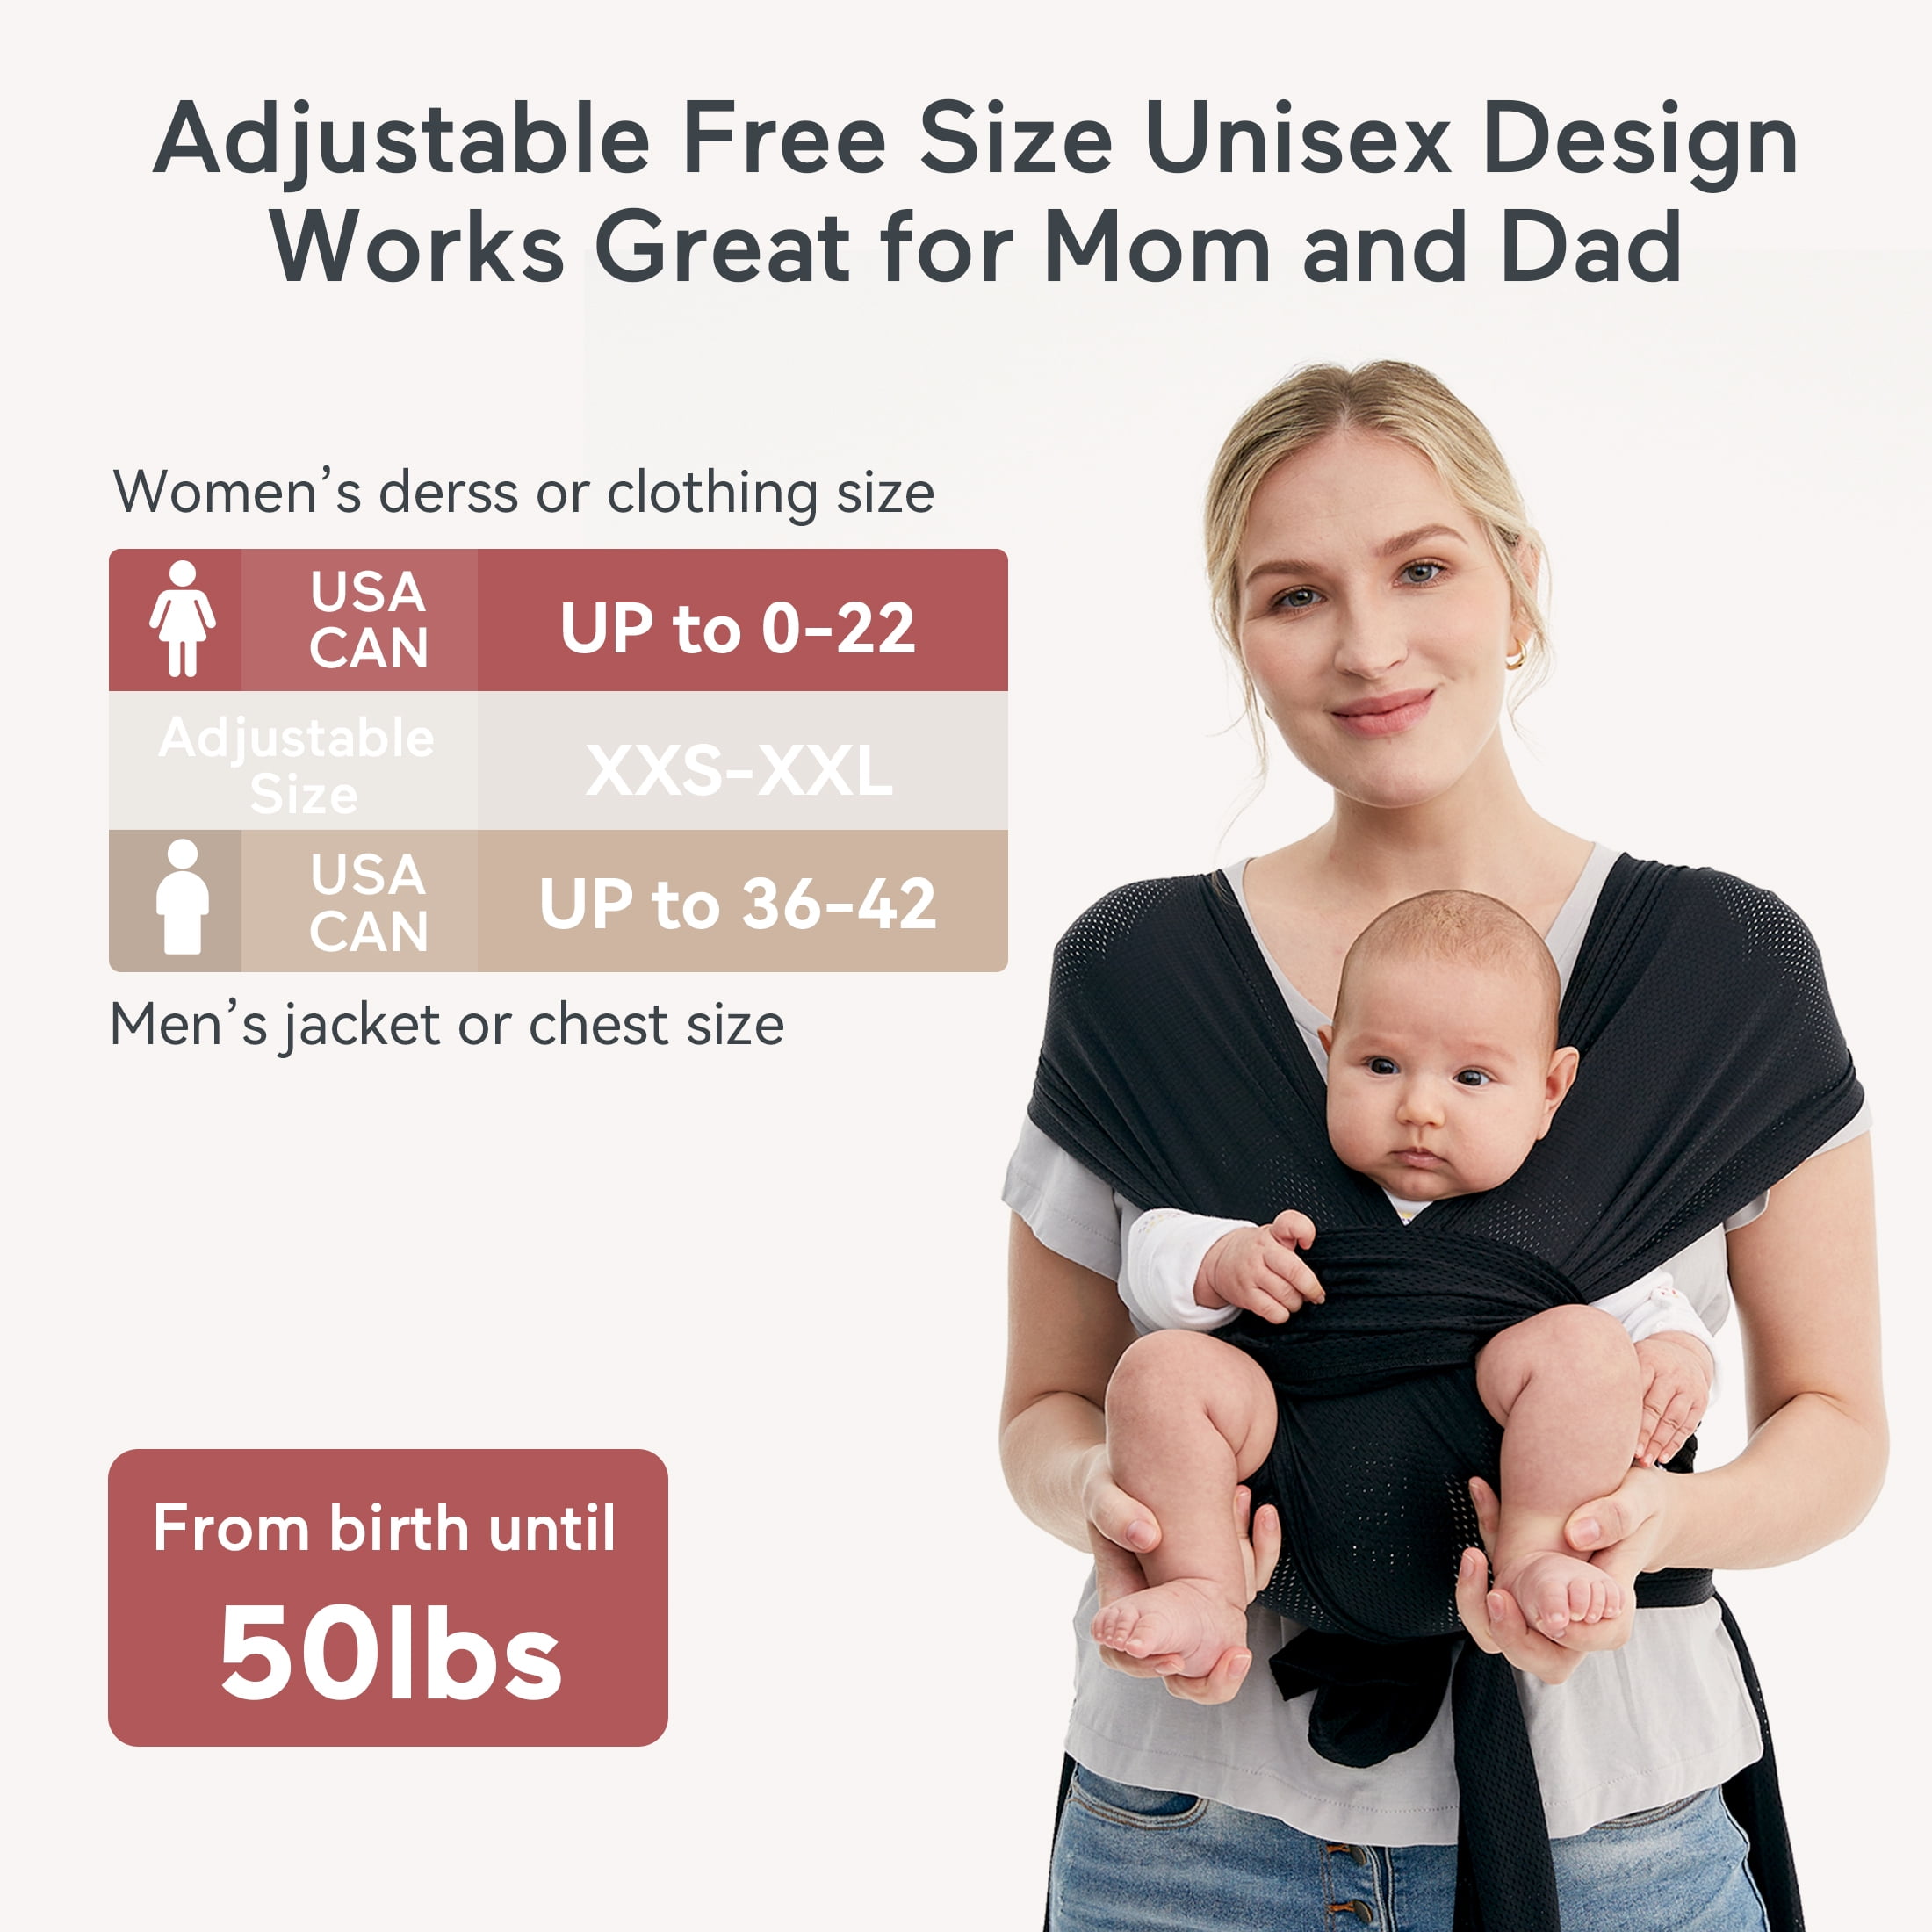 Best deals on Momcozy products - Klarna US »